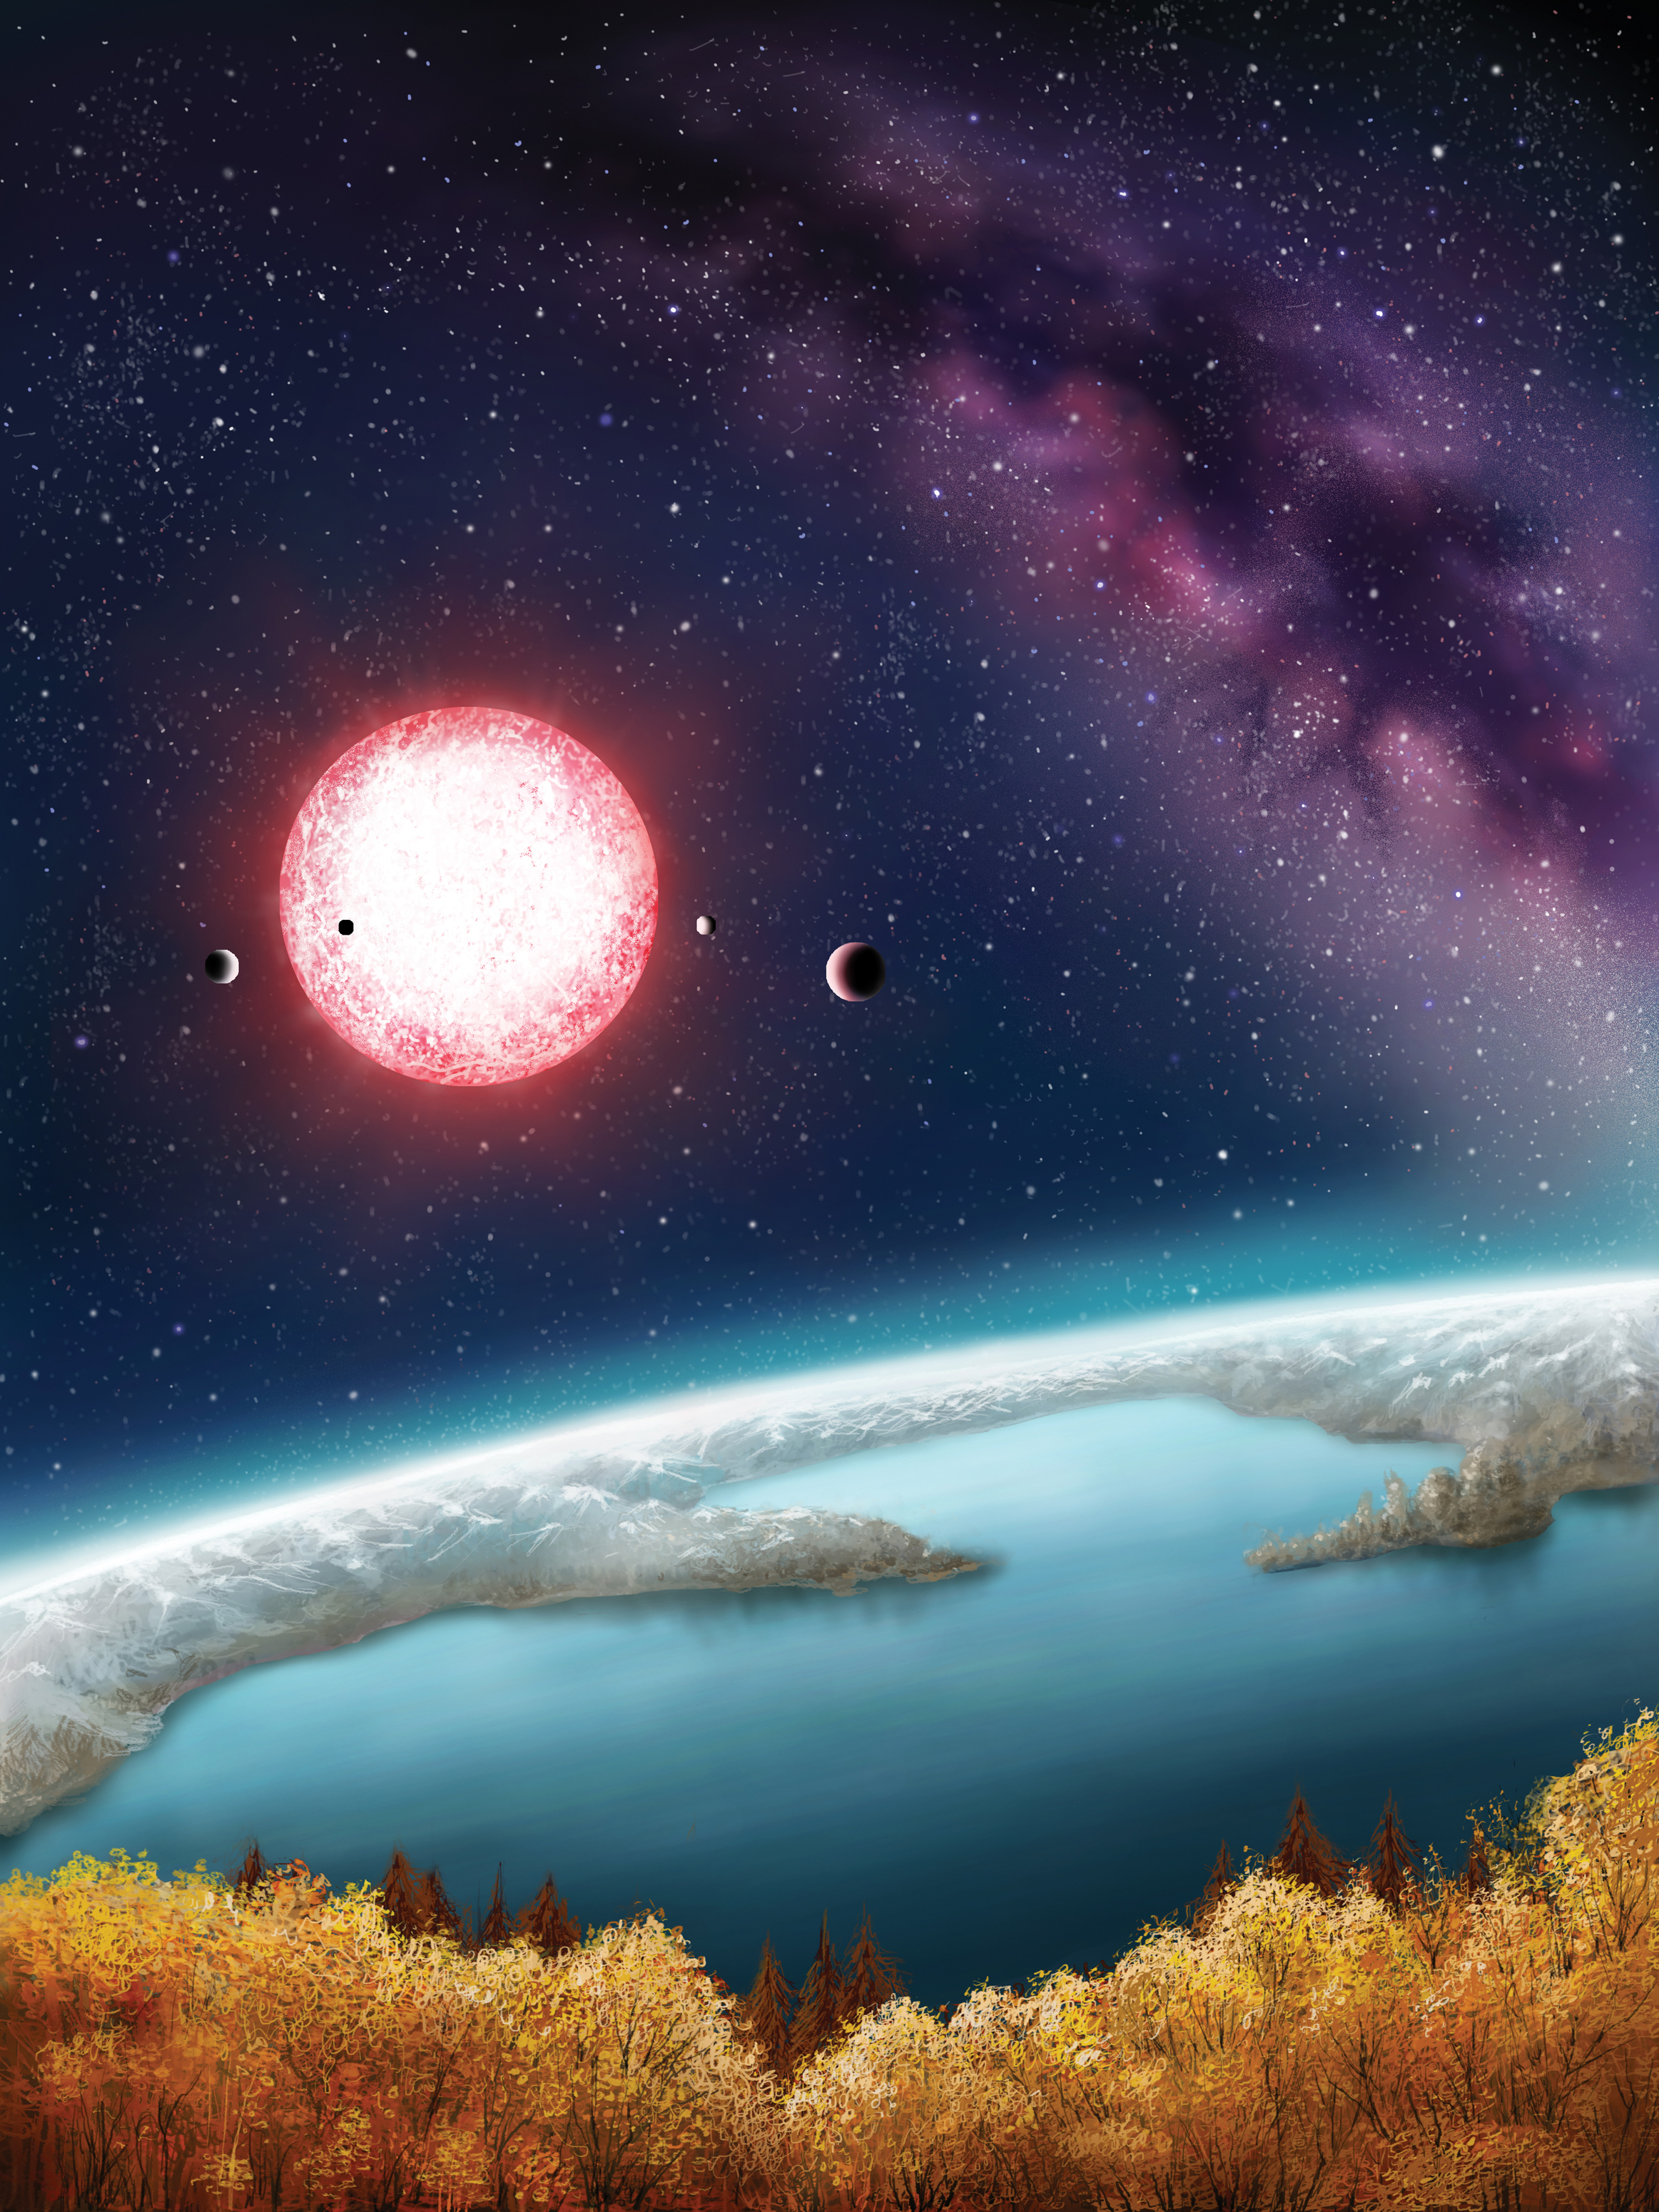 An artist's conception of Kepler 186f, with its reddish sun setting over its maybe-ocean